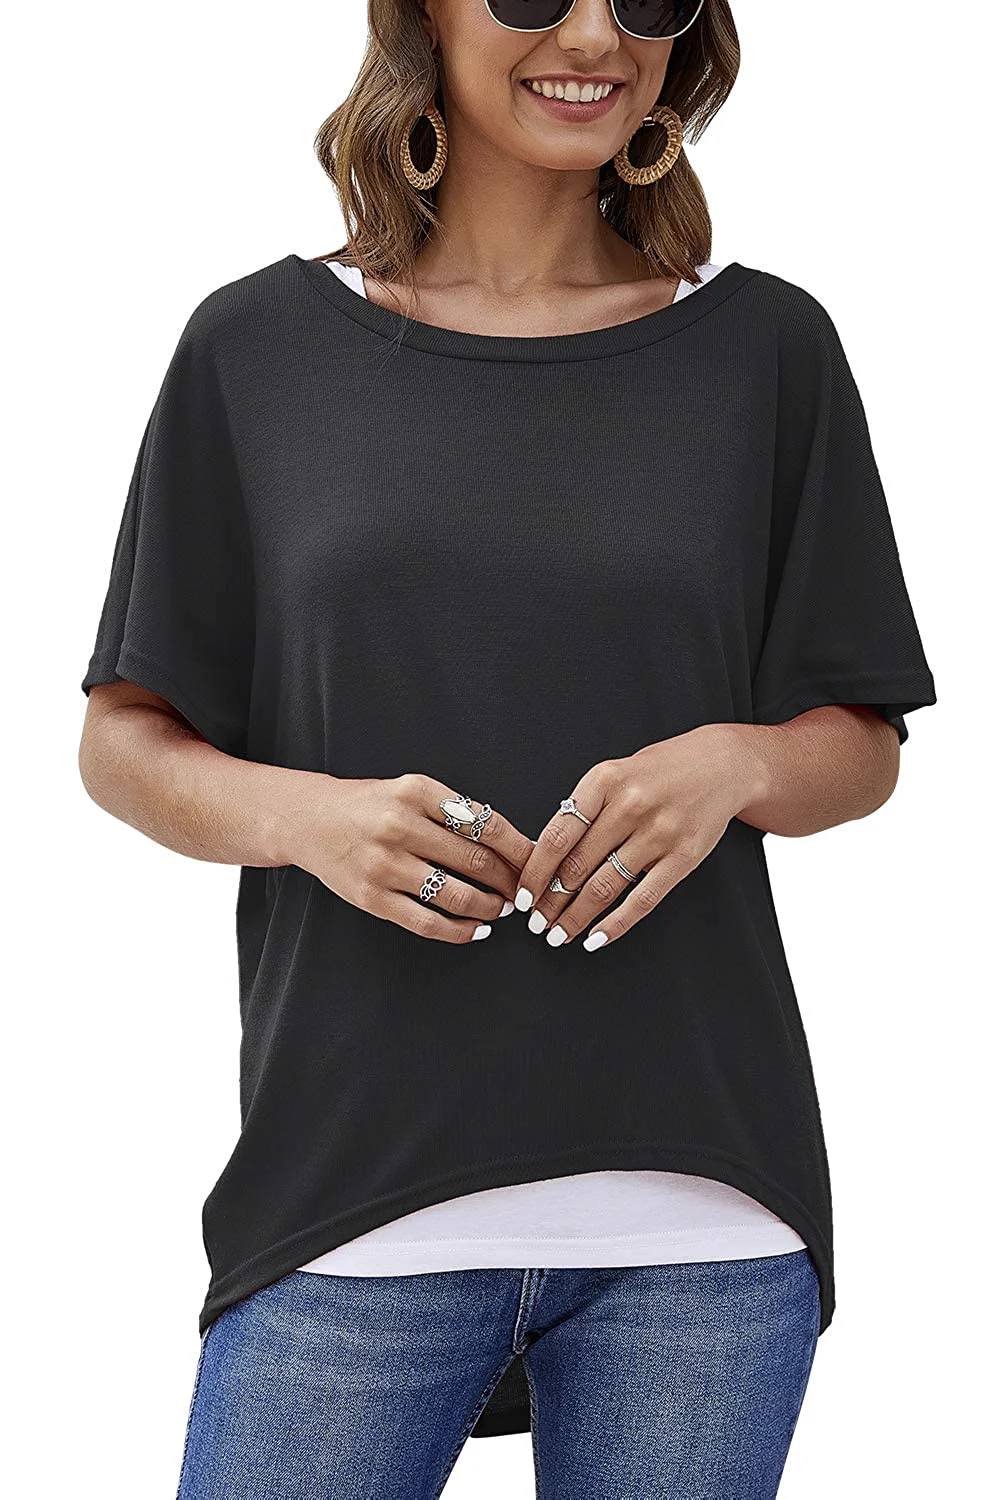 Womens Sweater Casual Oversized Baggy Off-Shoulder Long Sleeve Pullover Shirts Tops